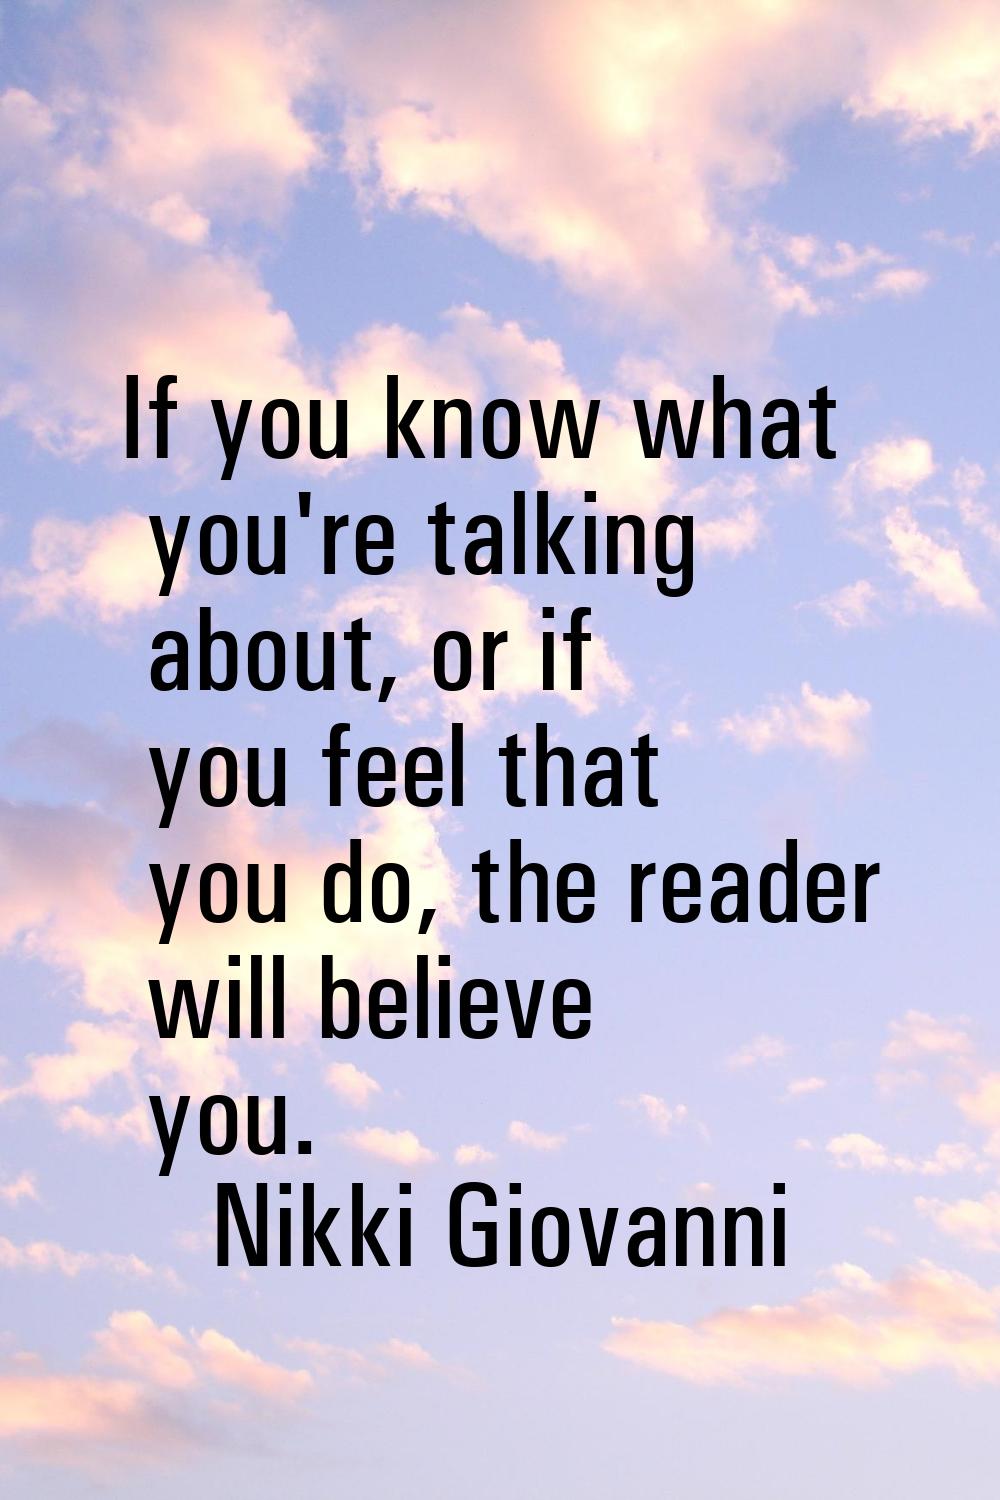 If you know what you're talking about, or if you feel that you do, the reader will believe you.